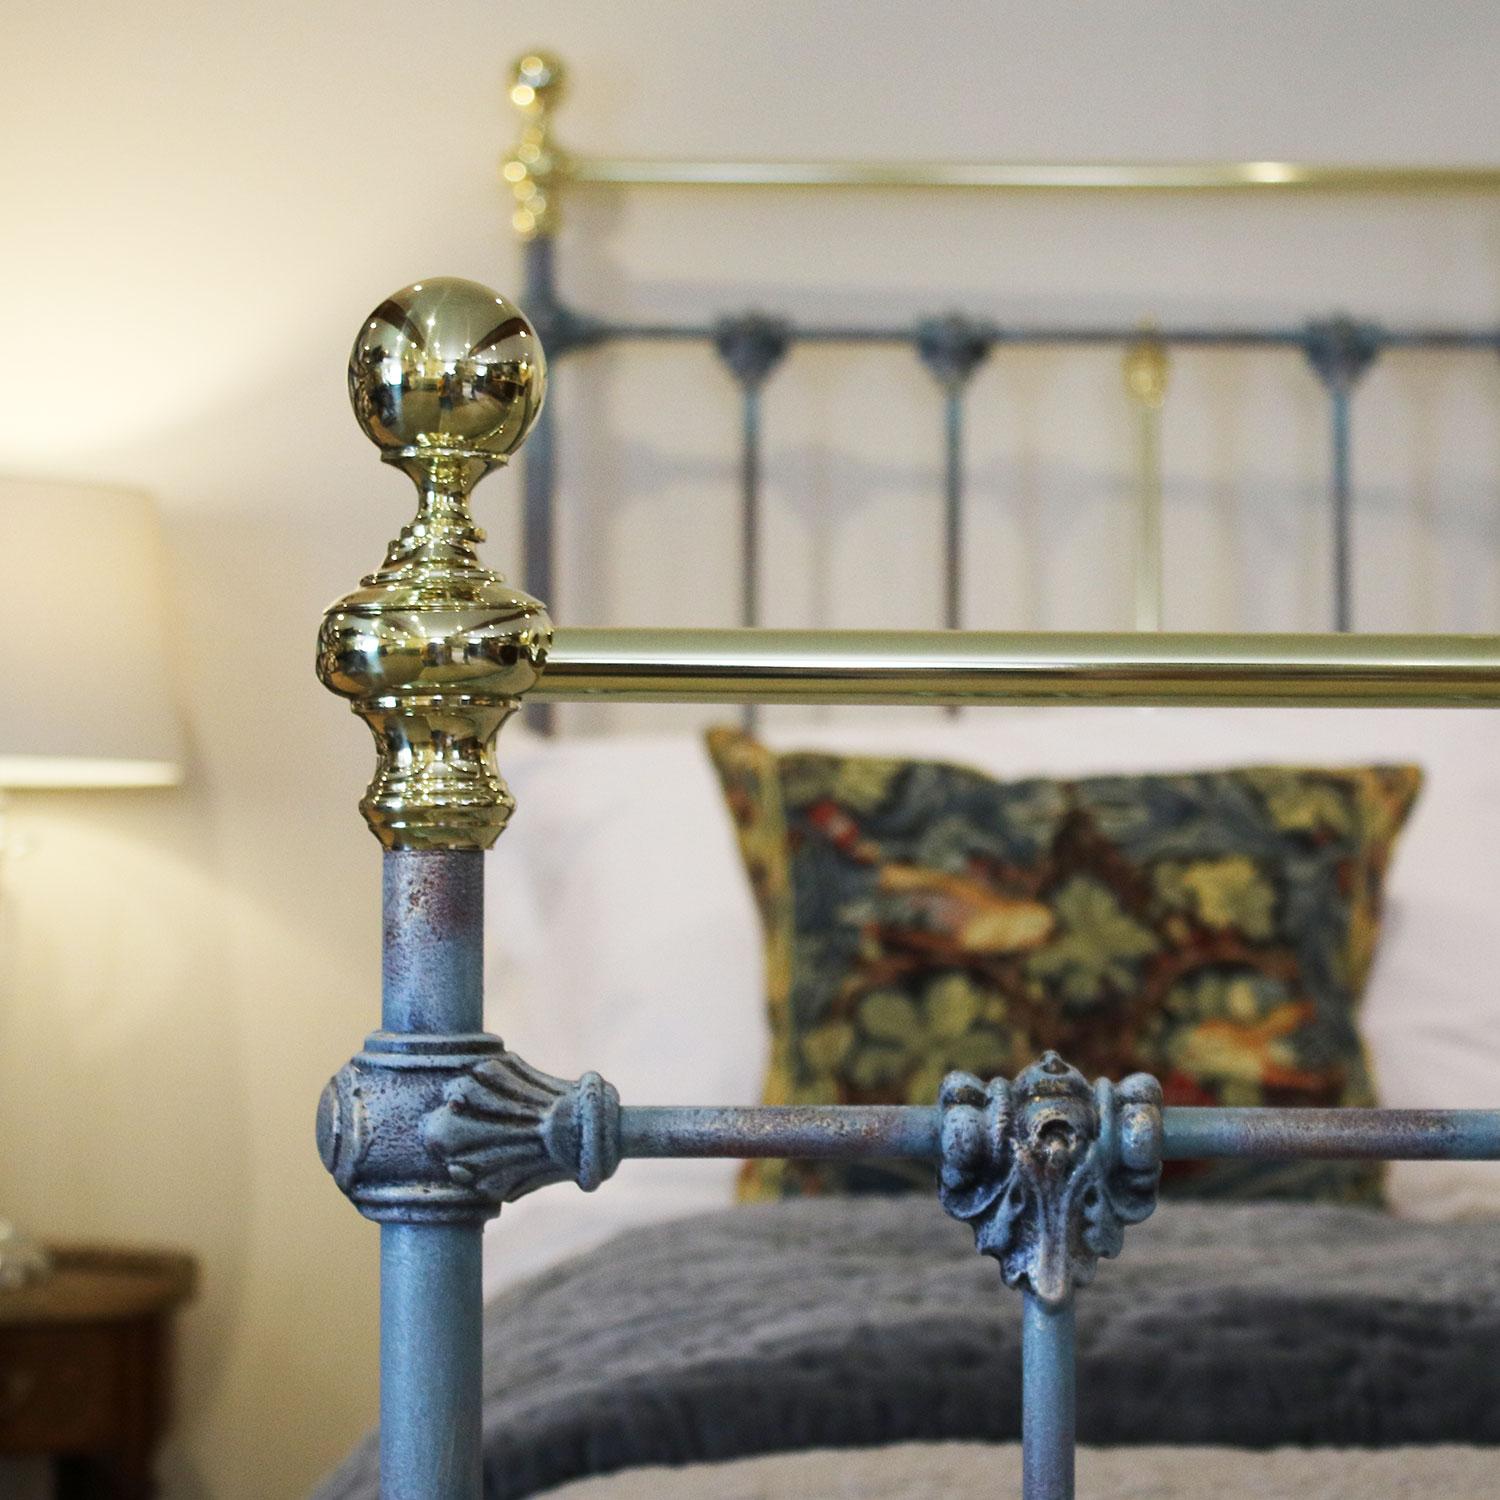 A superb brass and iron bedstead with decorative castings in Blue Verdigris.

This bed accepts a British king-size or US queen-size (measure: 5ft, 60 in or 150cm wide) base and mattress set.

The price is for the bed frame alone. The base,